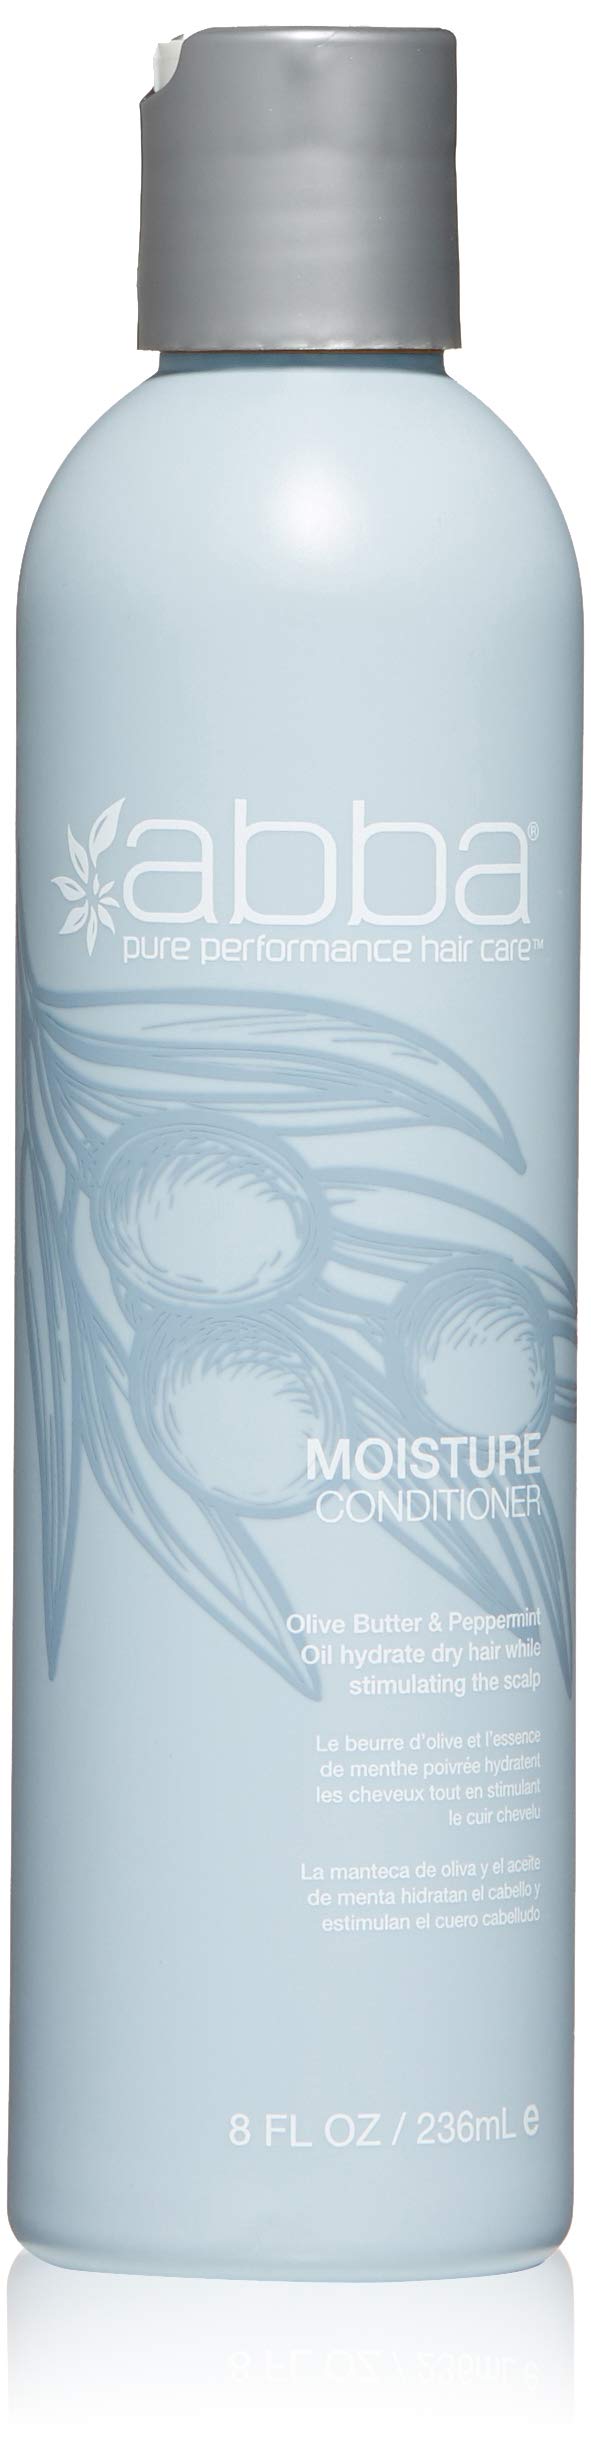 ABBA Moisture Conditioner, Olive Butter & Peppermint Oil Moisturize, Hydrate & Strengthen Dry Hair, Multiple Sizes